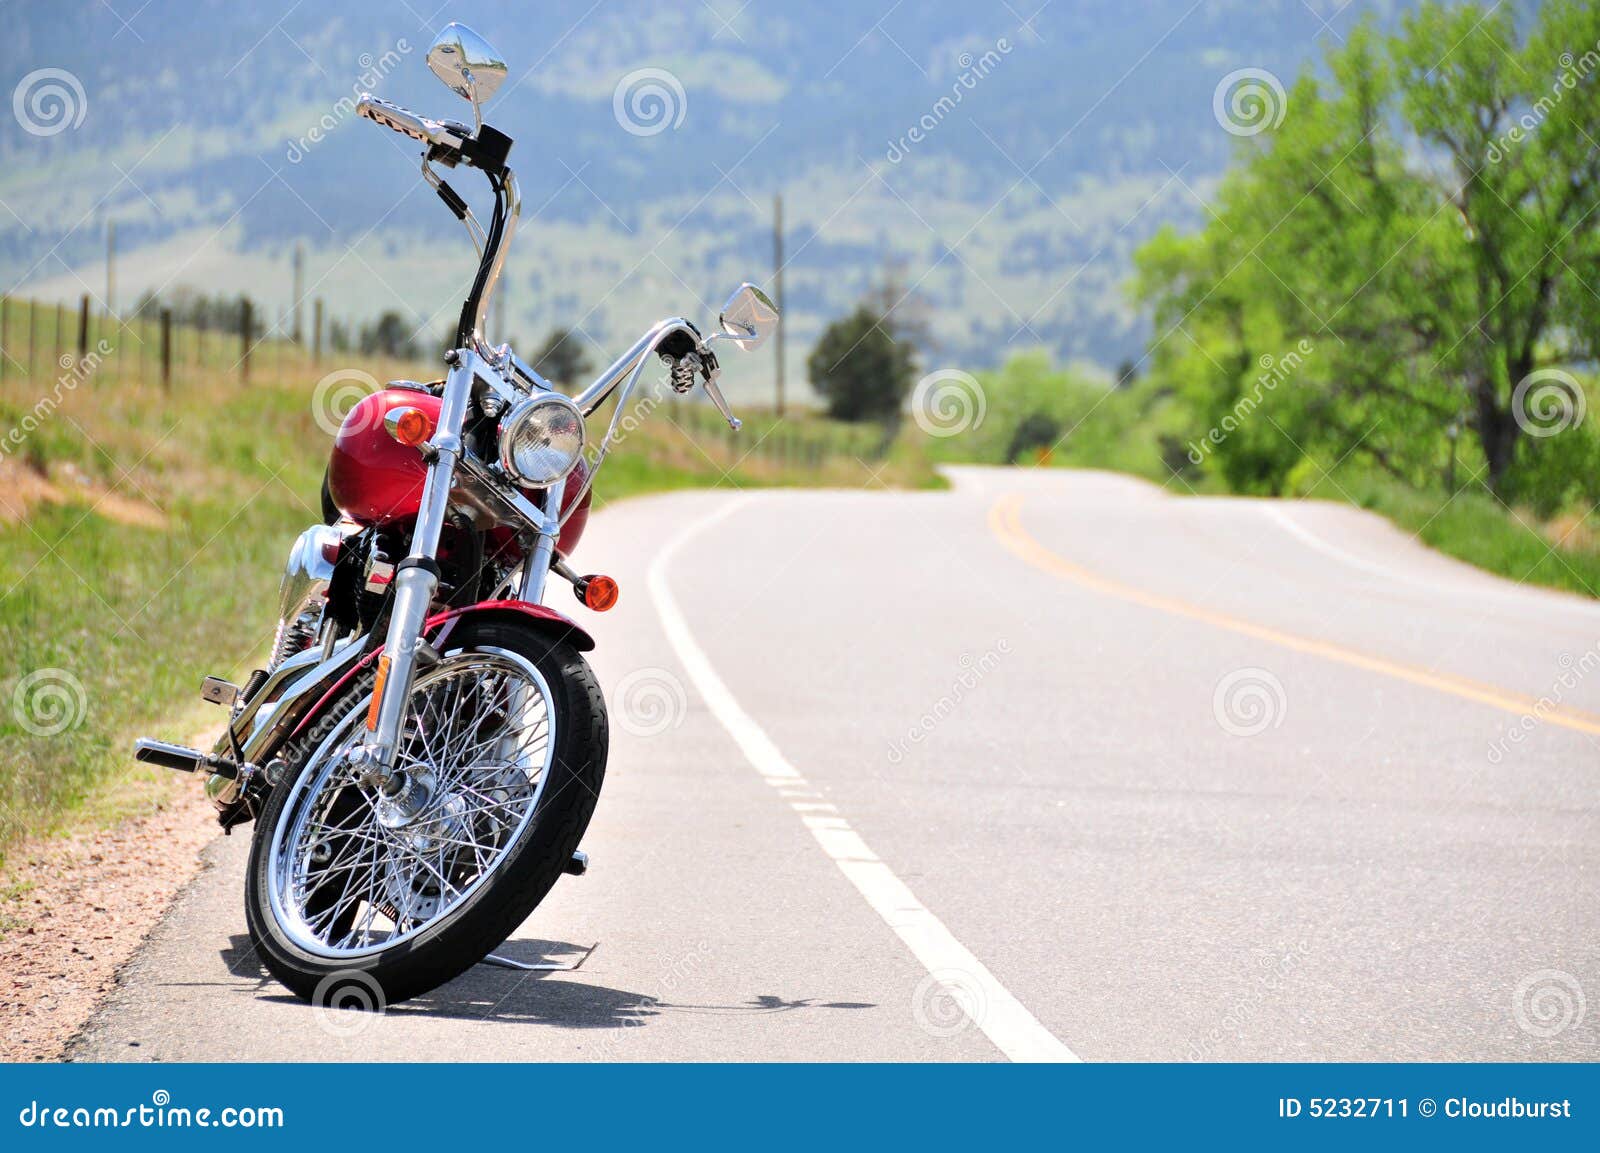 motorcycle on secluded road